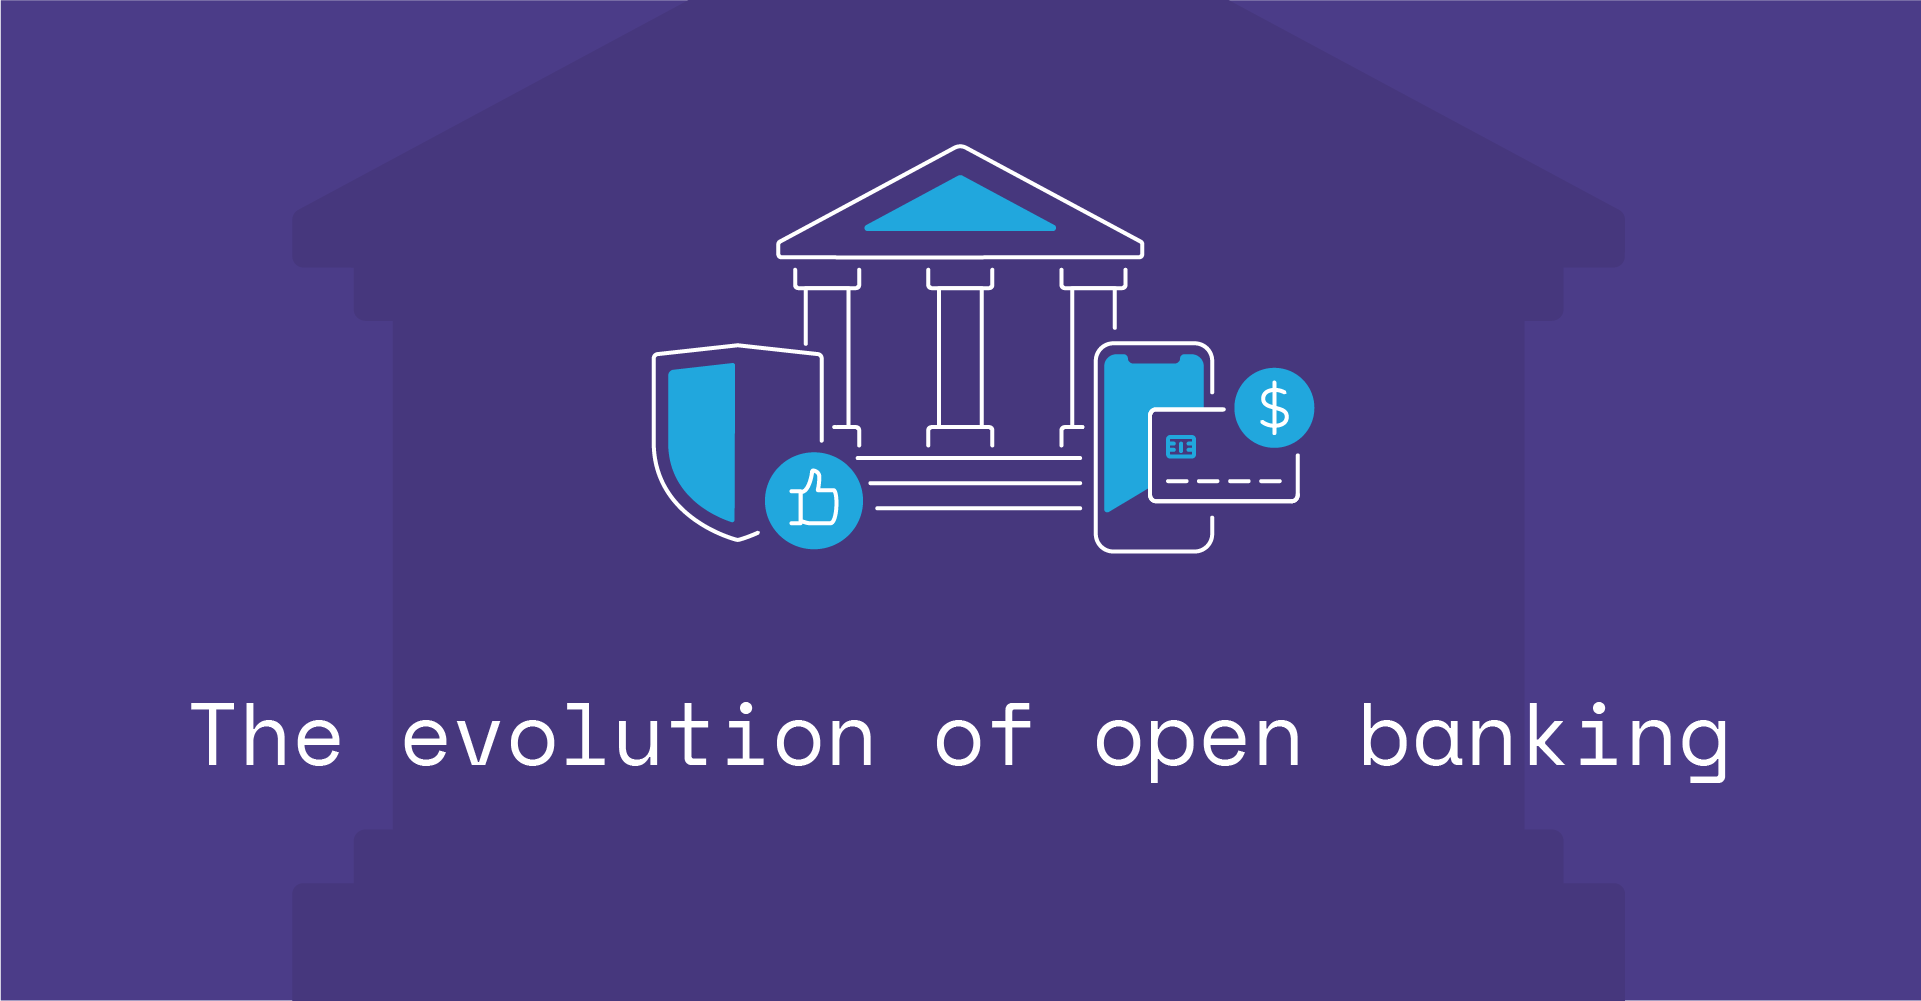 The evolution of open banking